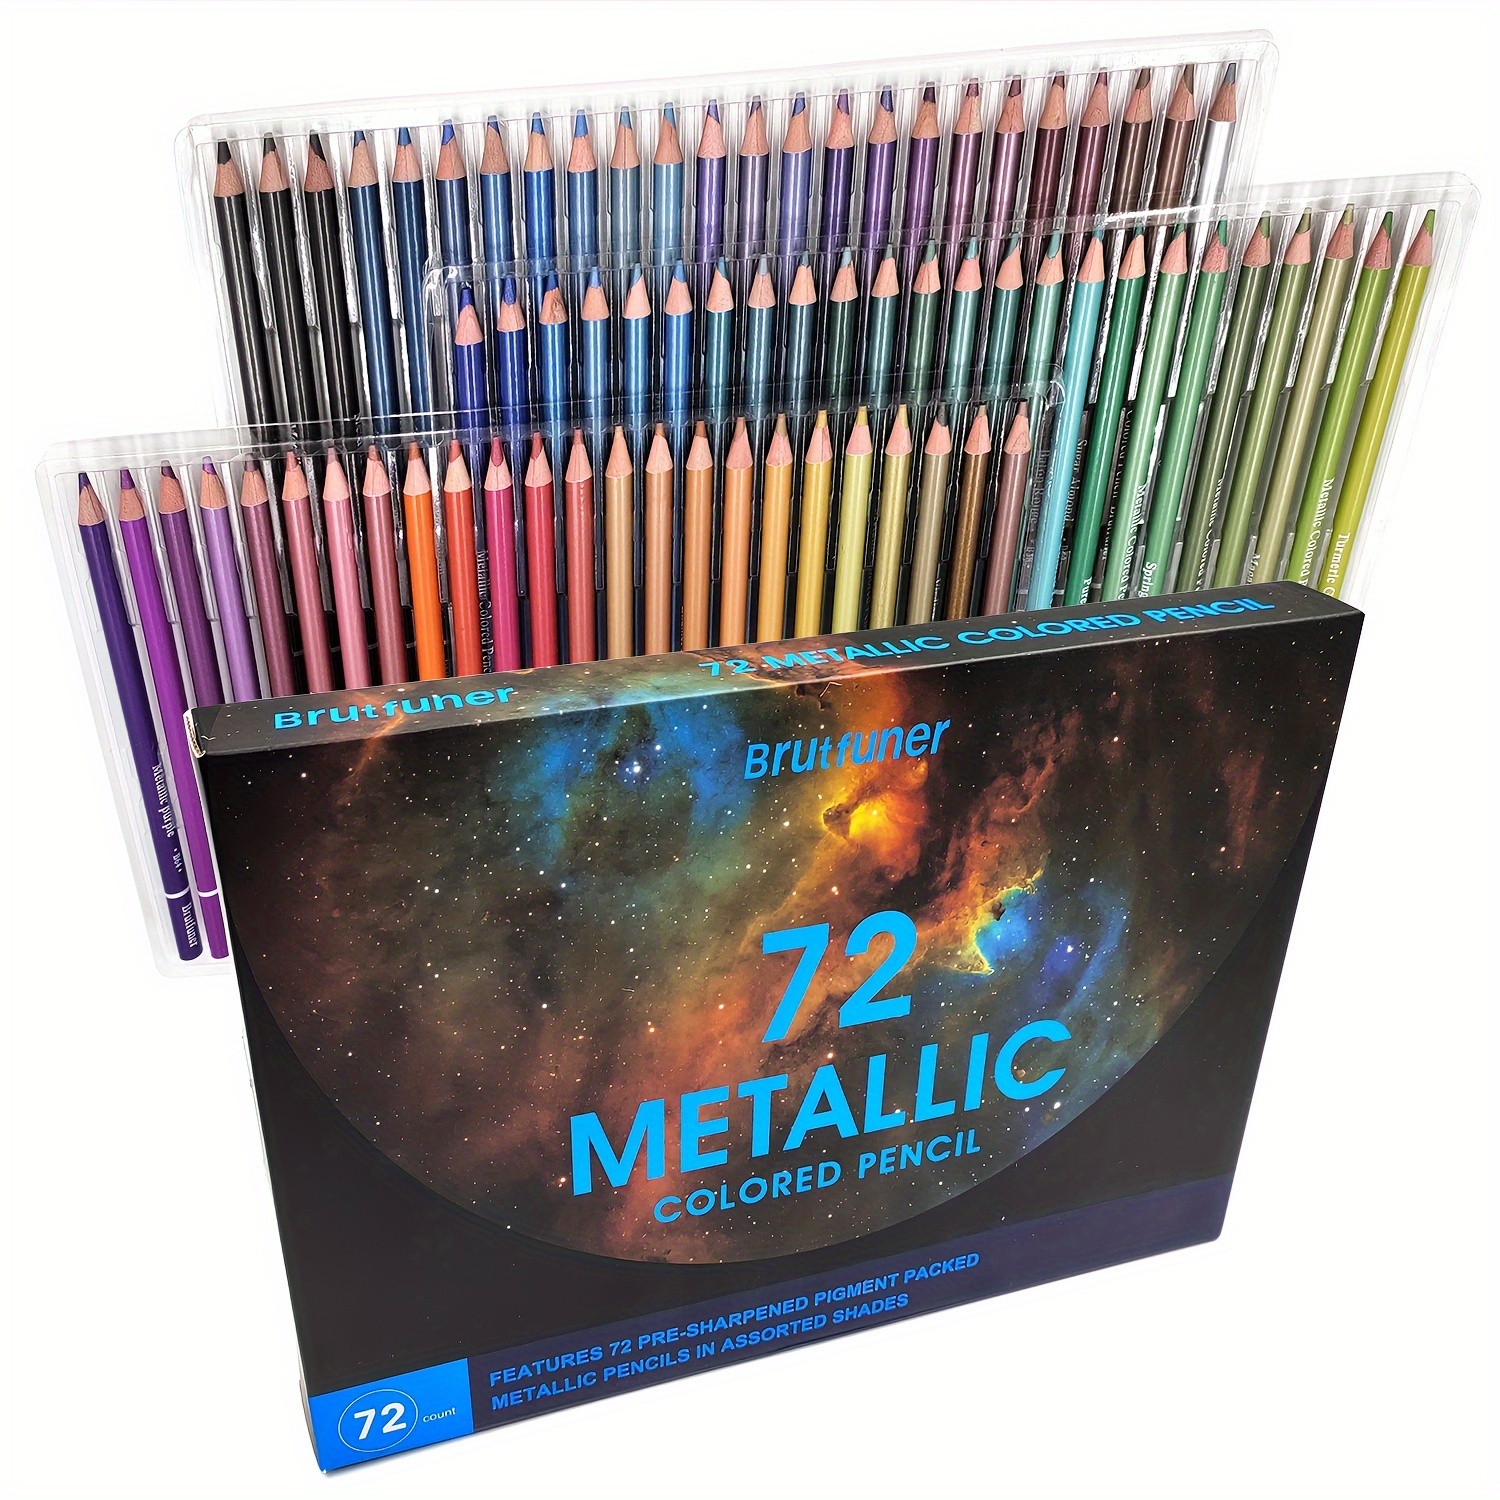 

Brutfuner 72-count Metallic Colored Pencils Set, 2mm+ Wire Diameter, 4b Hardness, Suitable For Ages 14 And Up, Pre-sharpened Oil-based Assorted Shades For Drawing And Coloring